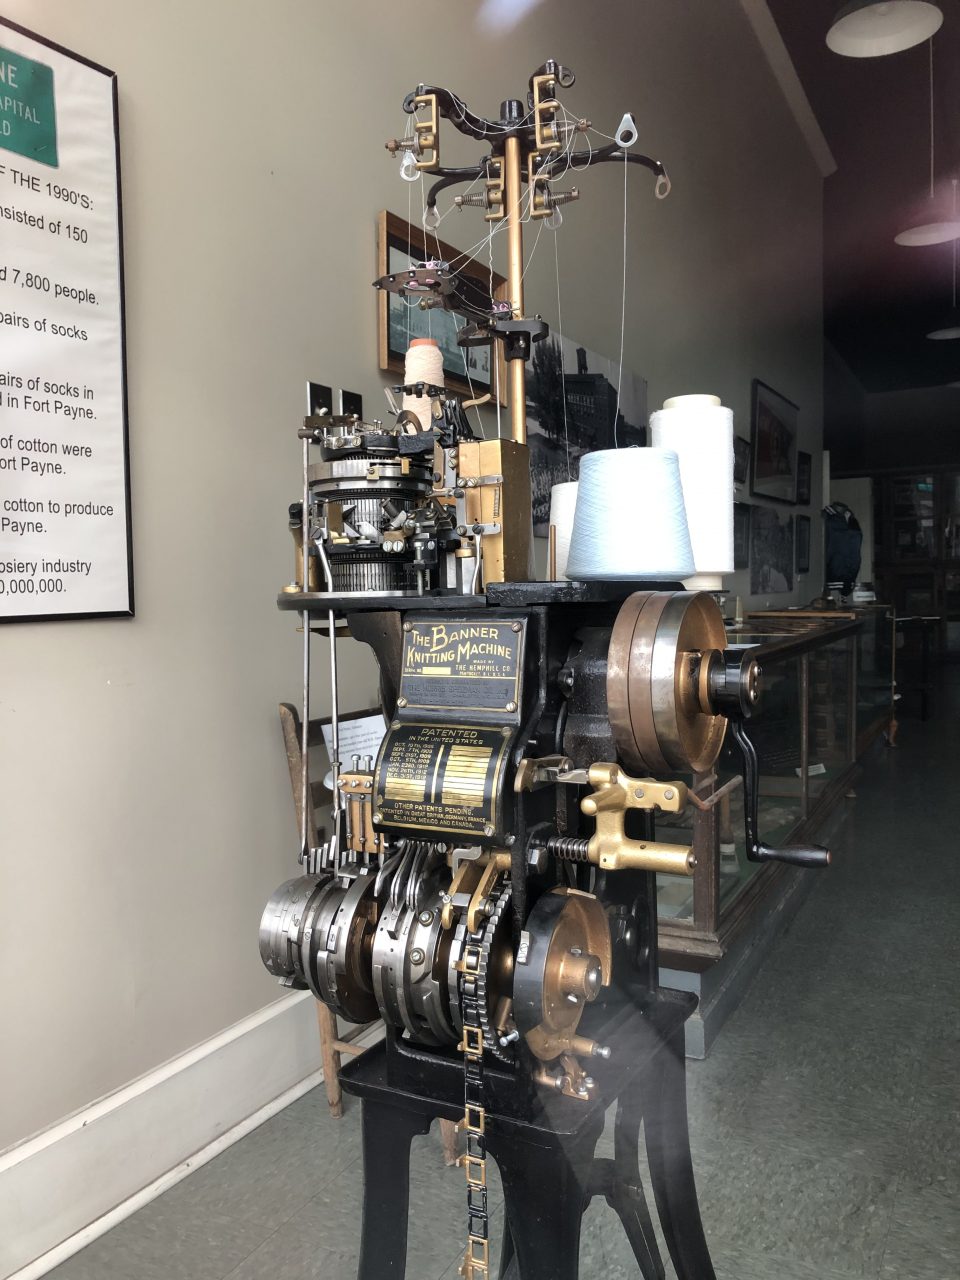 An old knitting machine seen through the window of the Hosiery Museum, which was not open at the time I was in town.